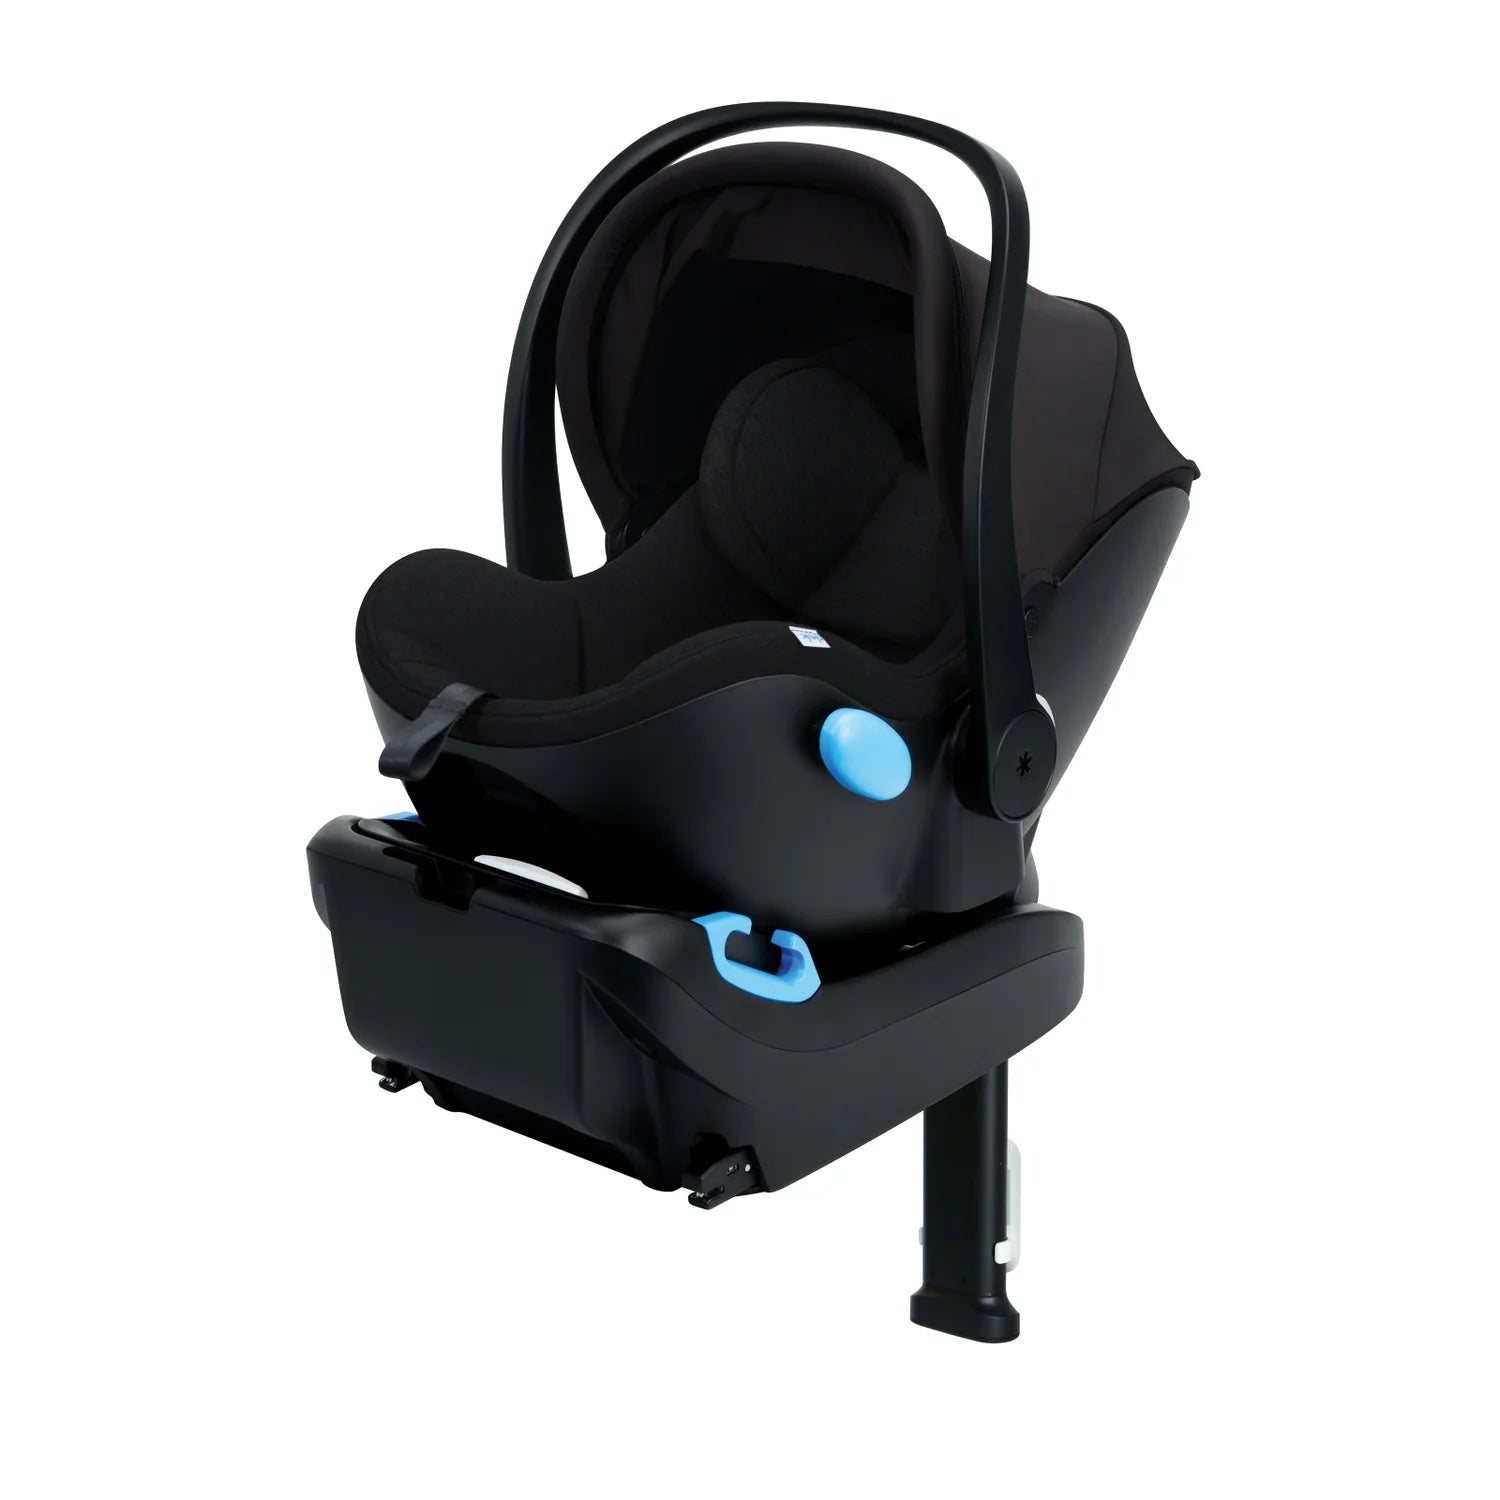 Clek 2022 Liing Infant Car Seat with Matching Insert - ANB Baby -826783013781$300 - $500